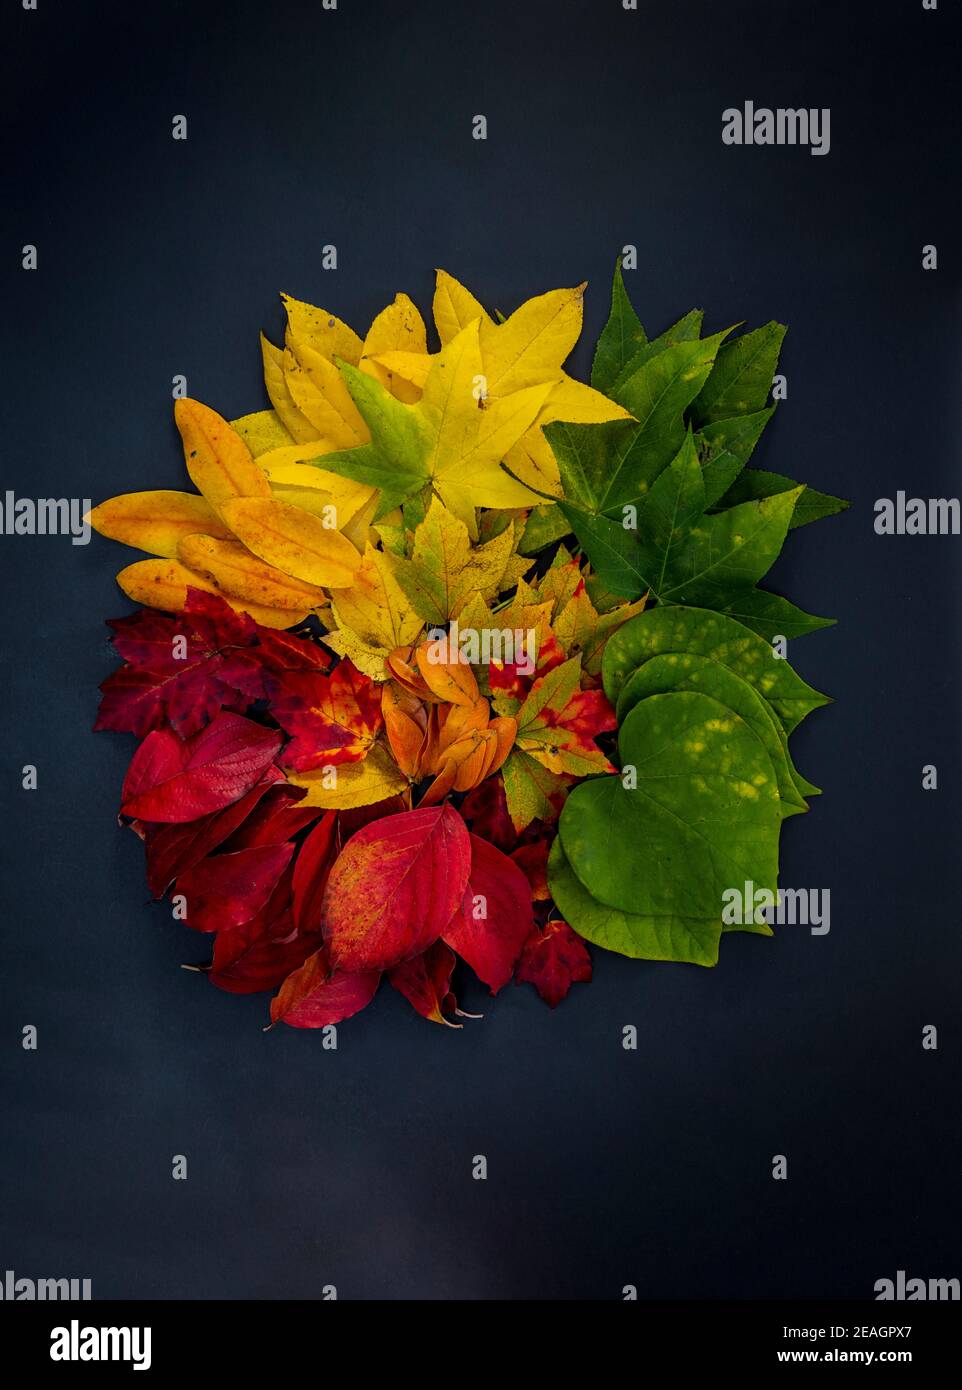 Autumn leaves in a range of colors including red, orange, yellow, green, and brown arranged in one pile on a black  background. Stock Photo